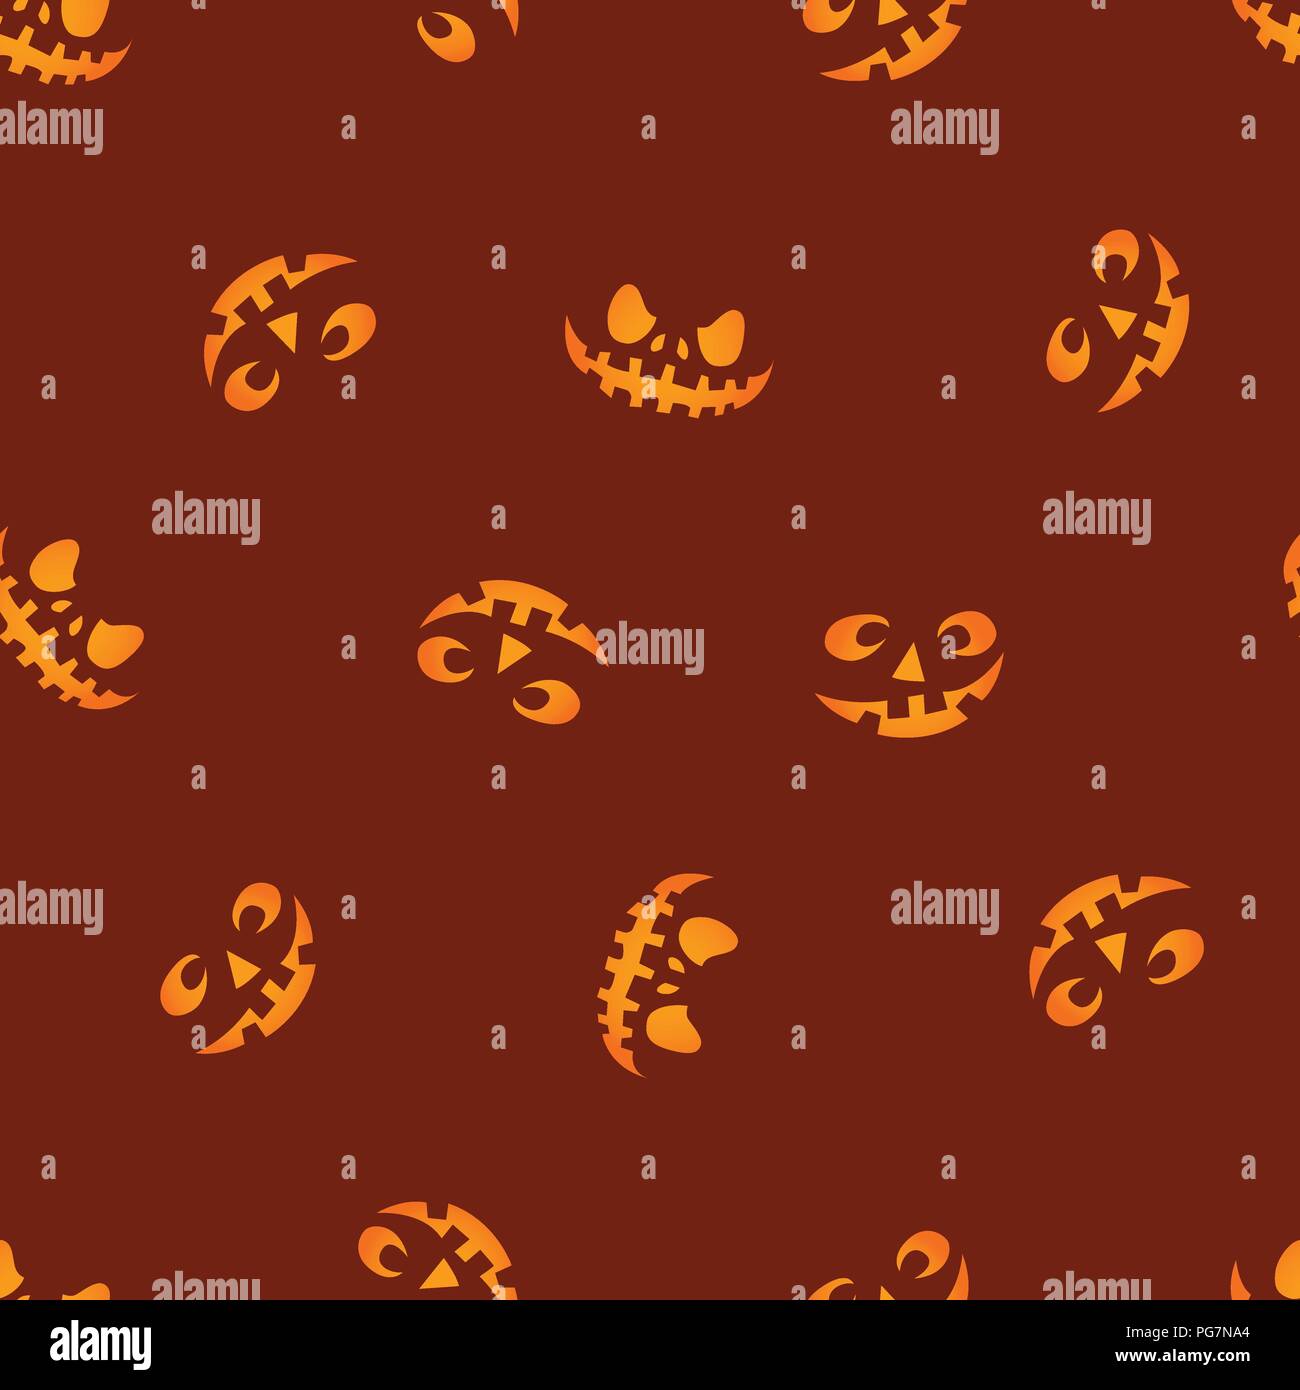 Pumpkin faces glowing on red background. Seamless pattern. Stock Vector